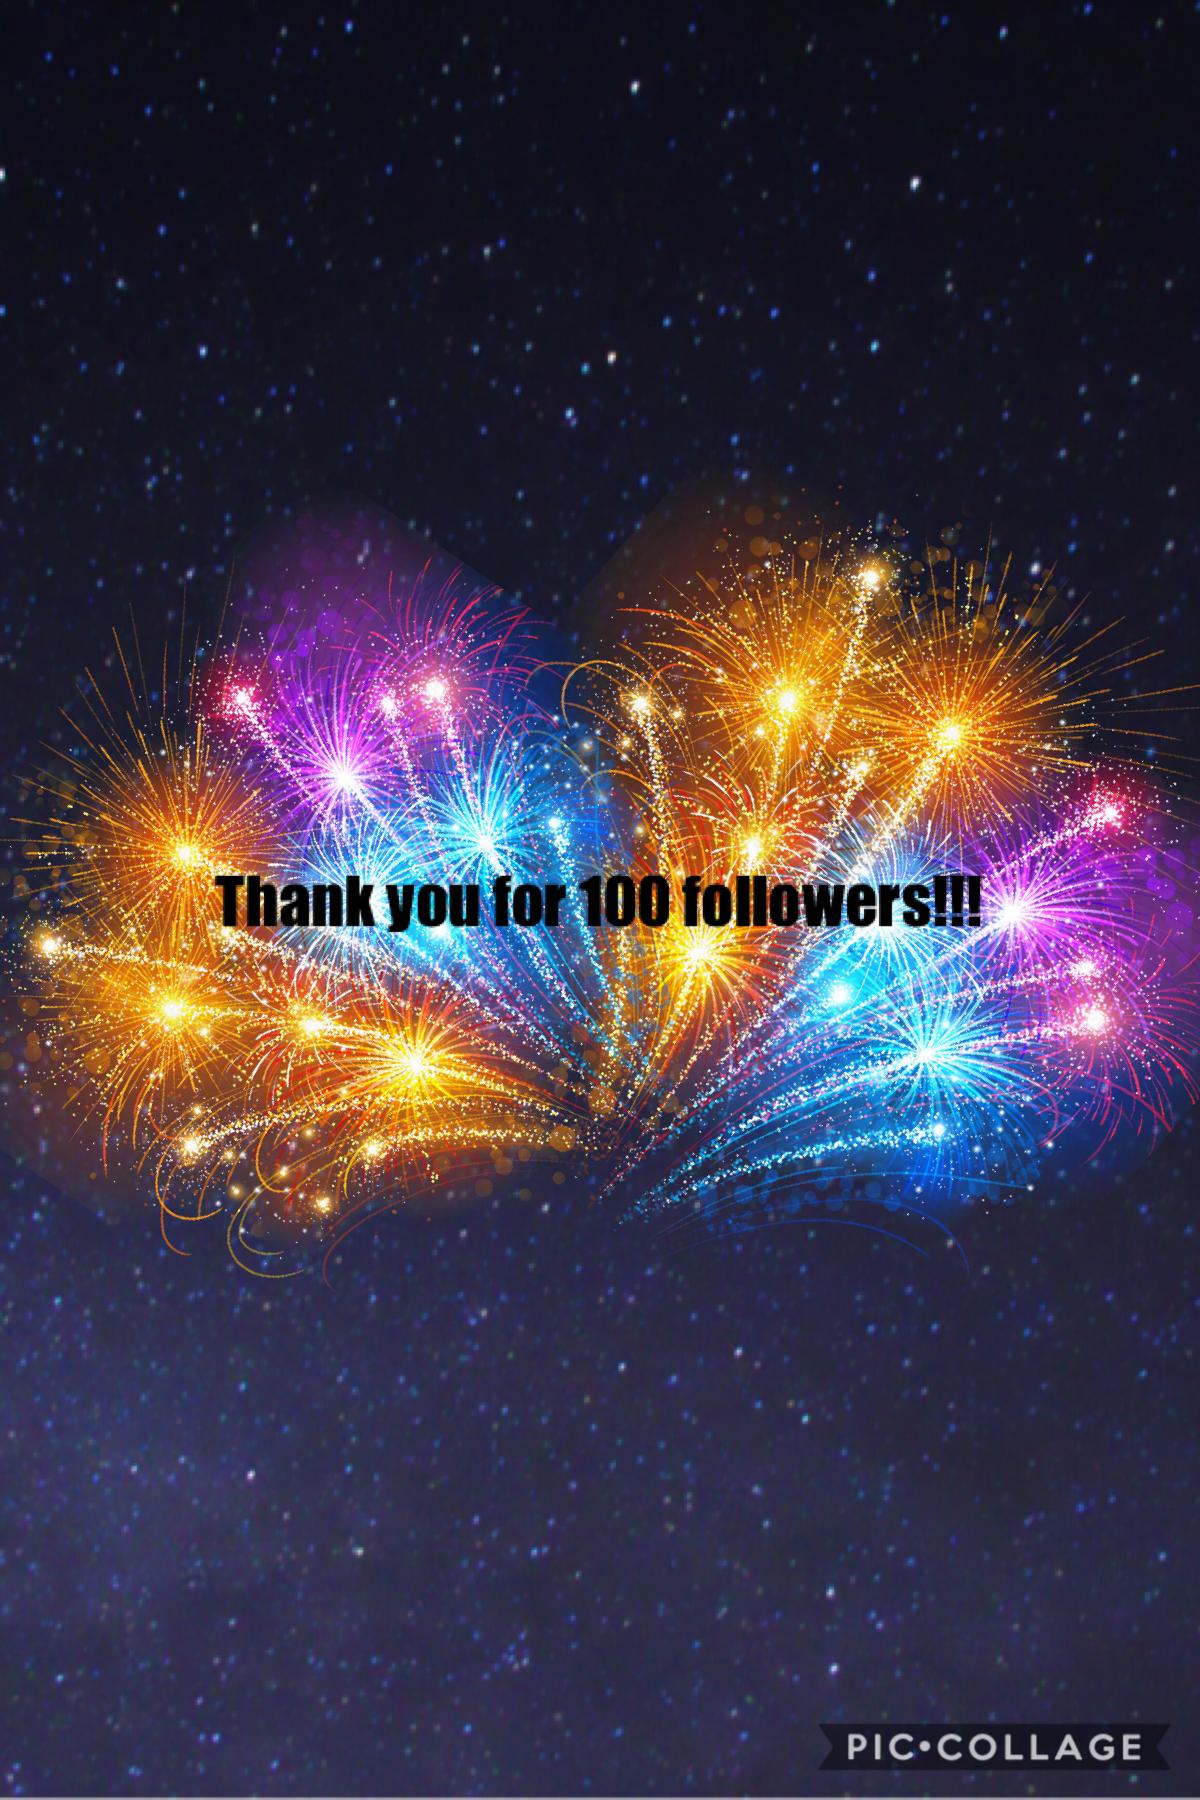 ❤️❤️❤️

Thank you guys sooo much for 100 followers!!!